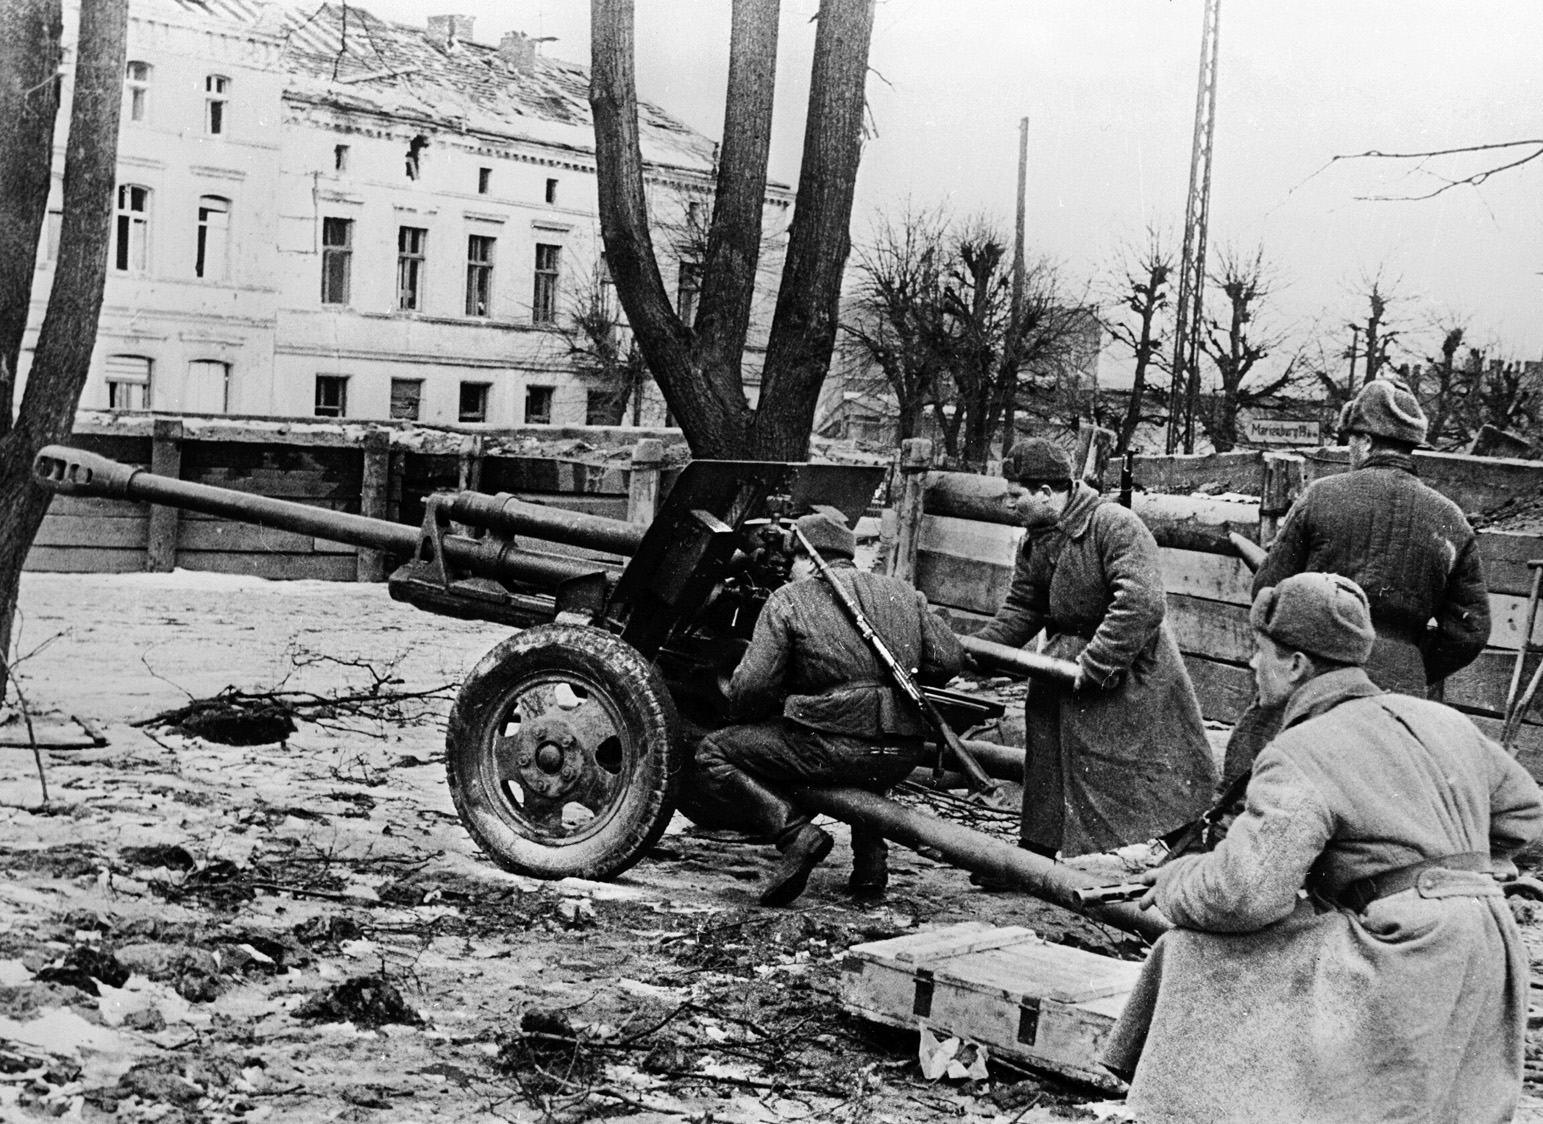 Red Army soldiers with a 76mm ZiS-3 gun prepare to fire it against buildings in downtown Danzig, March 1945.